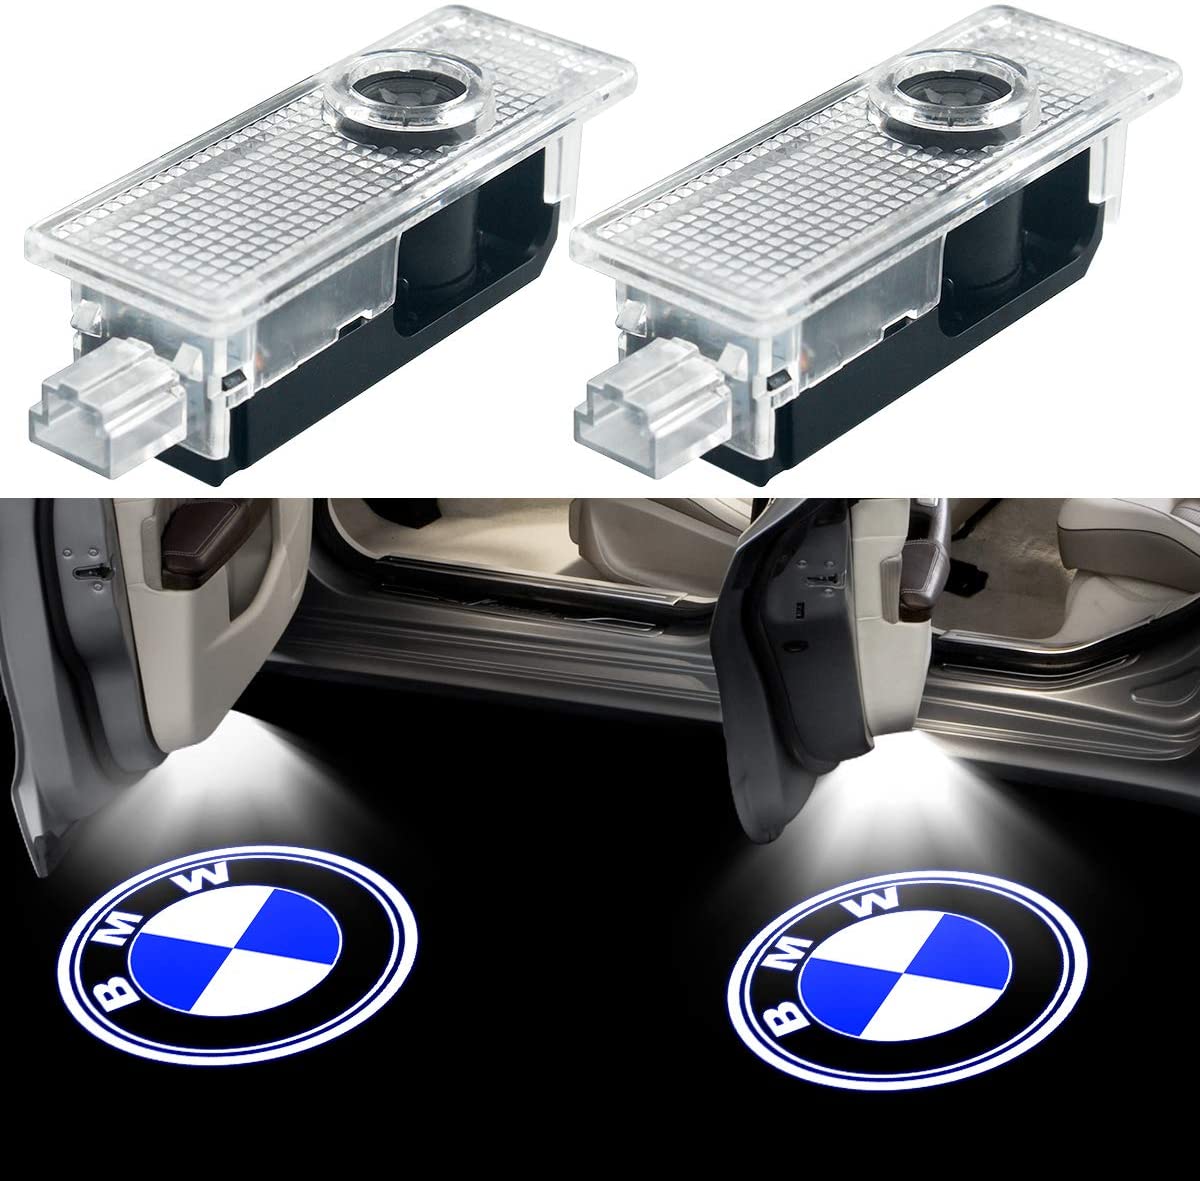 Car LED Door BMW Welcome Logo Projector Ghost Shadow Light for X1, X3, X5, X6 Class, 7 Series, 3 Series GT, 6 Series Interior Accessories